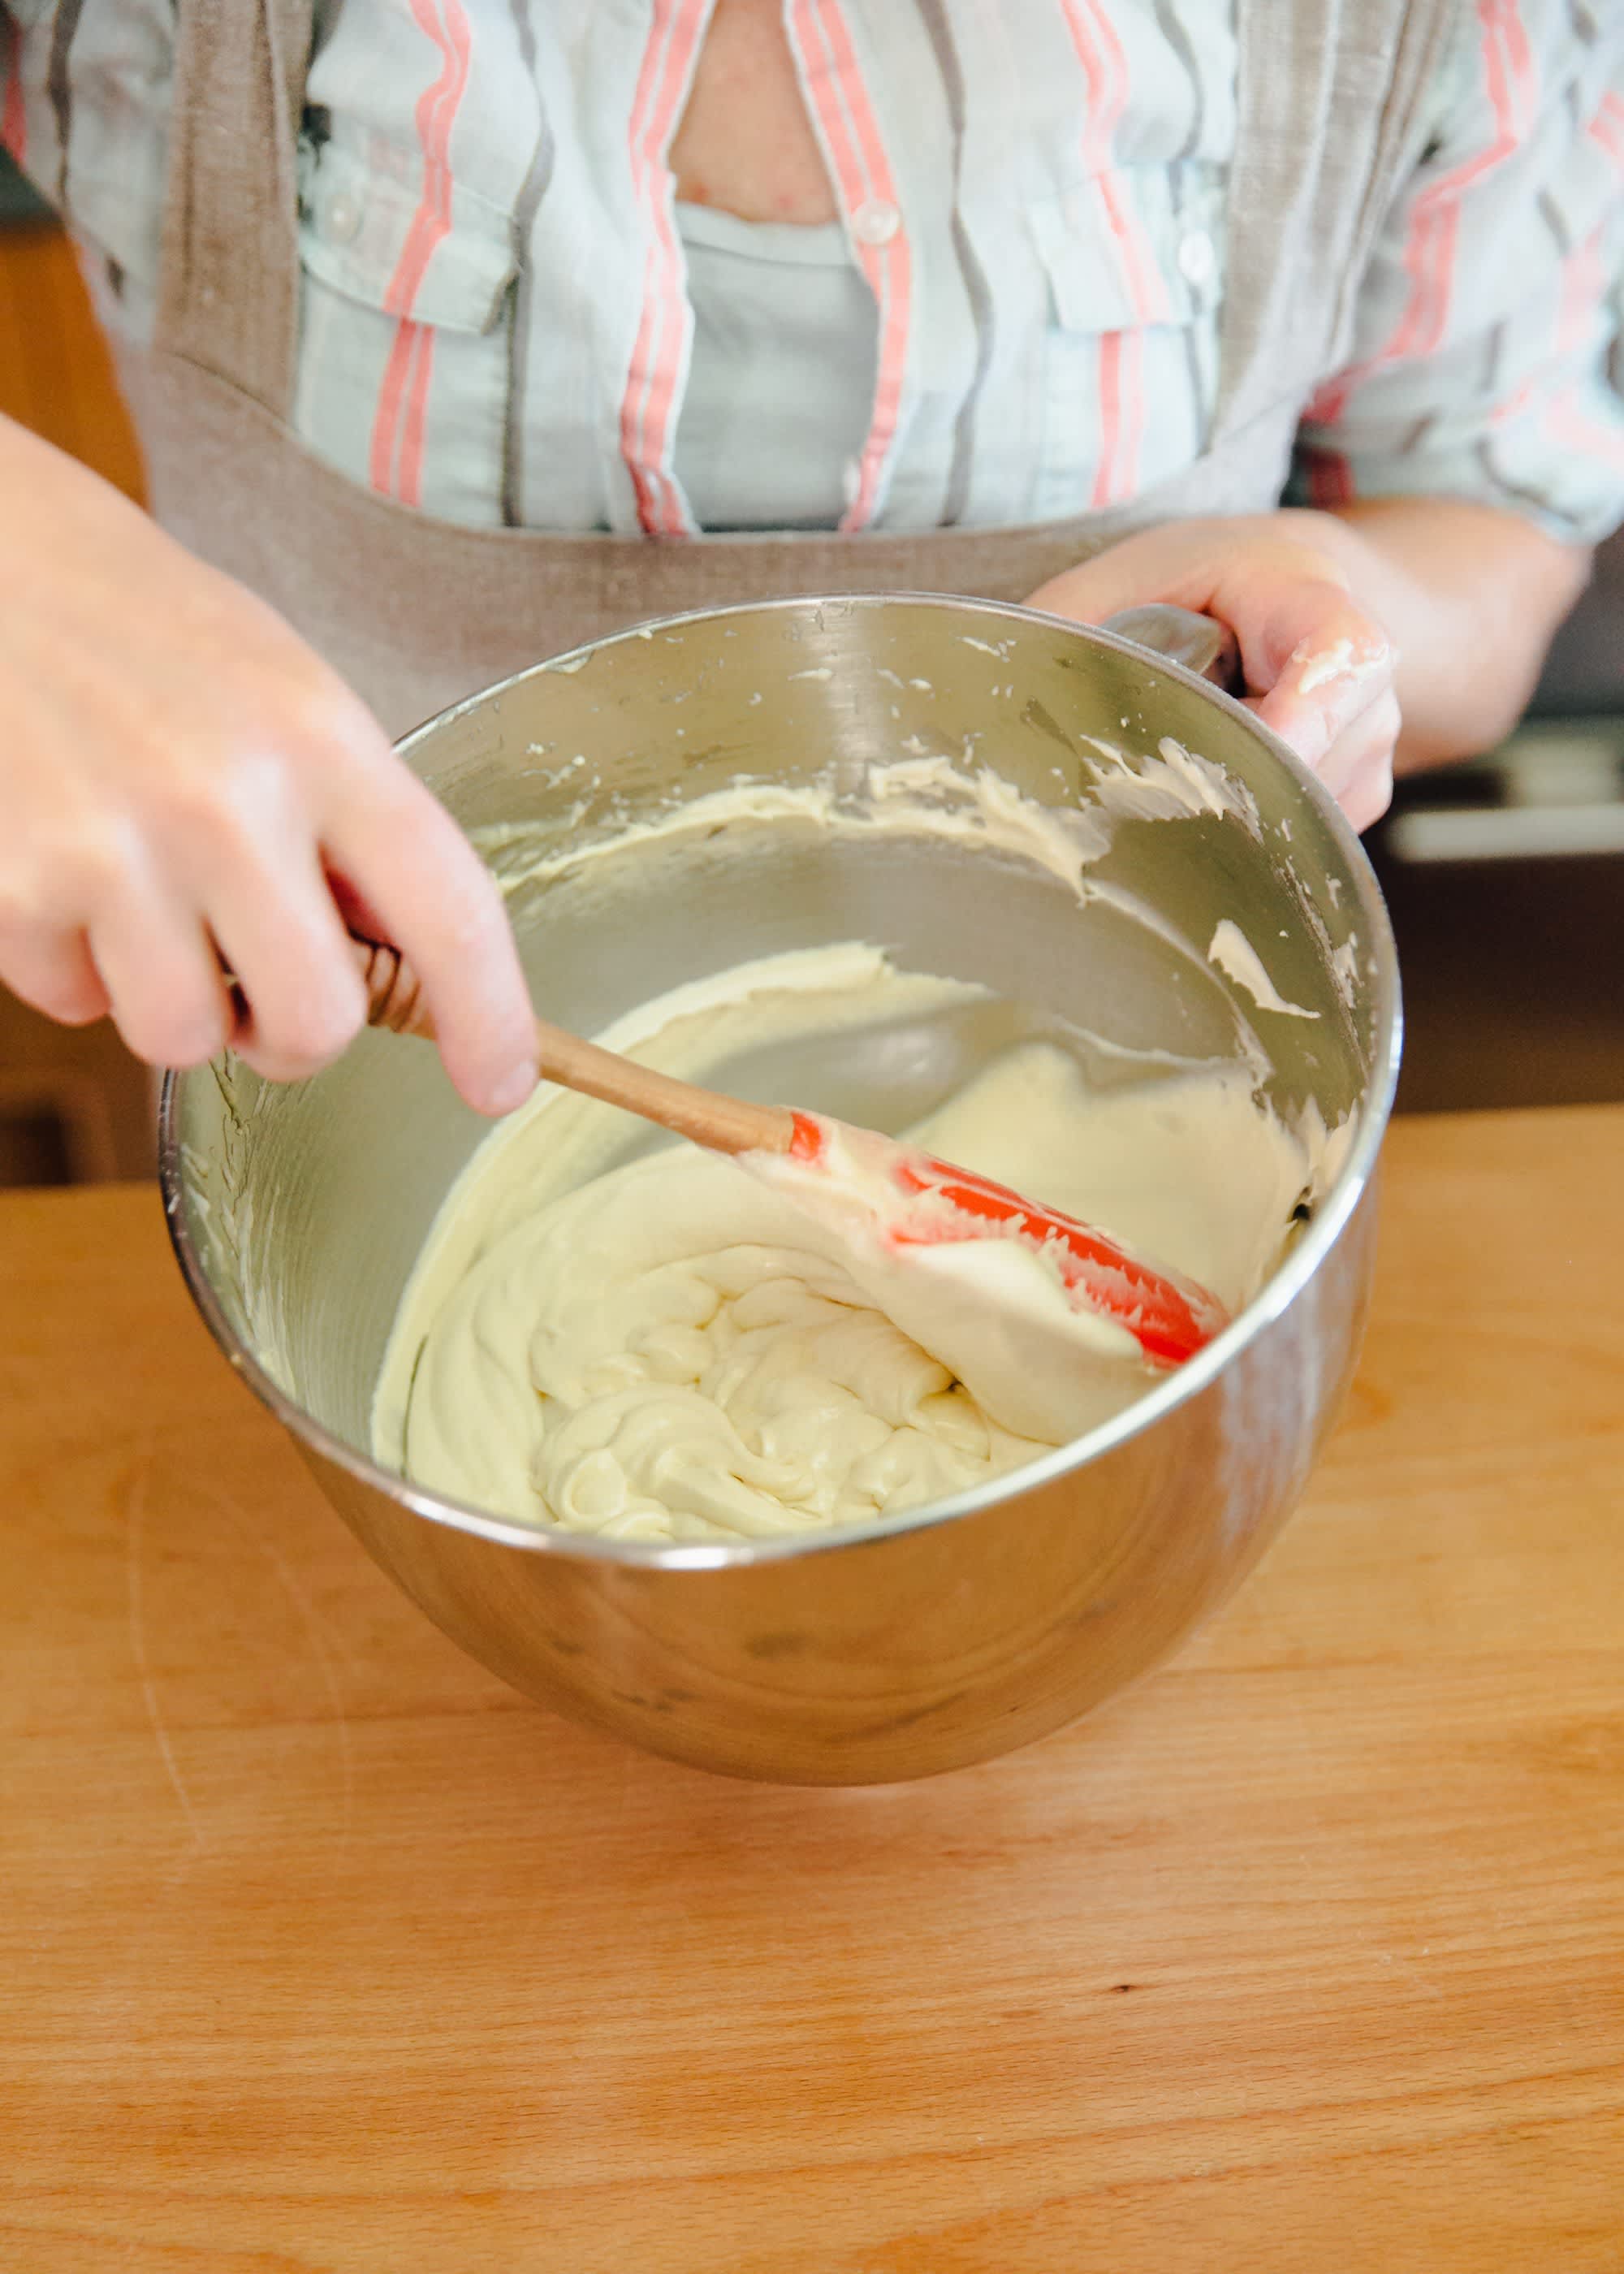 How to Avoid Curdled Cake Batter - Pastries Like a Pro